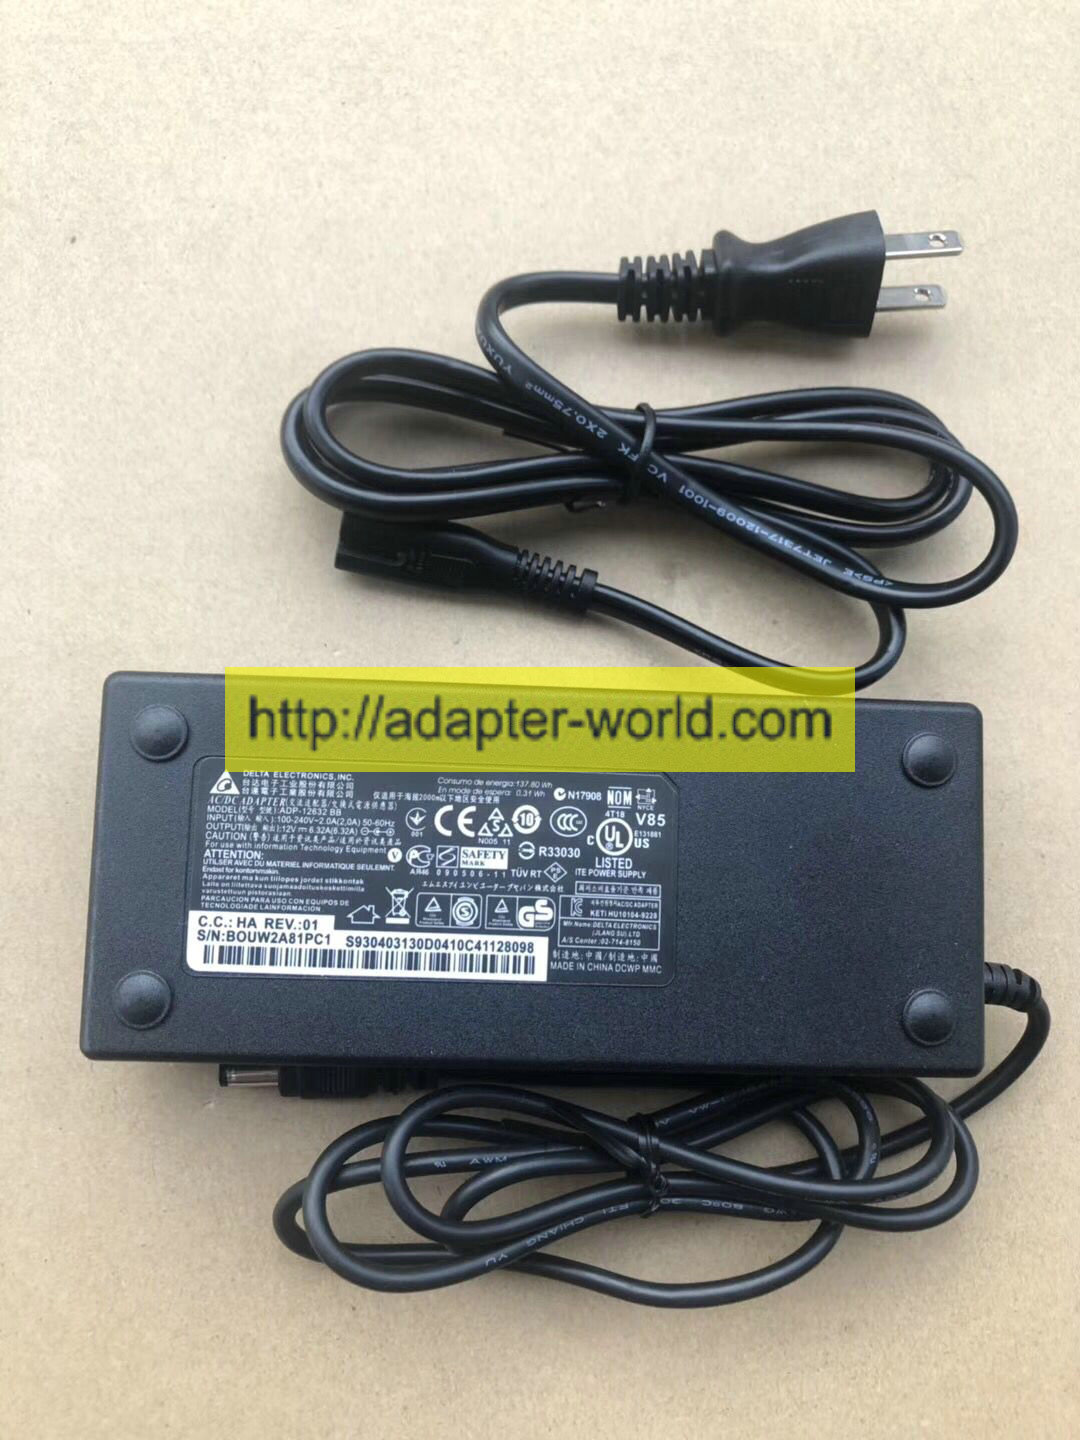 *100% Brand NEW* APD 12V--6.32A APD-12632 BB FOR BOUW2A81PC1 Switching Power Adapter Free shipping!